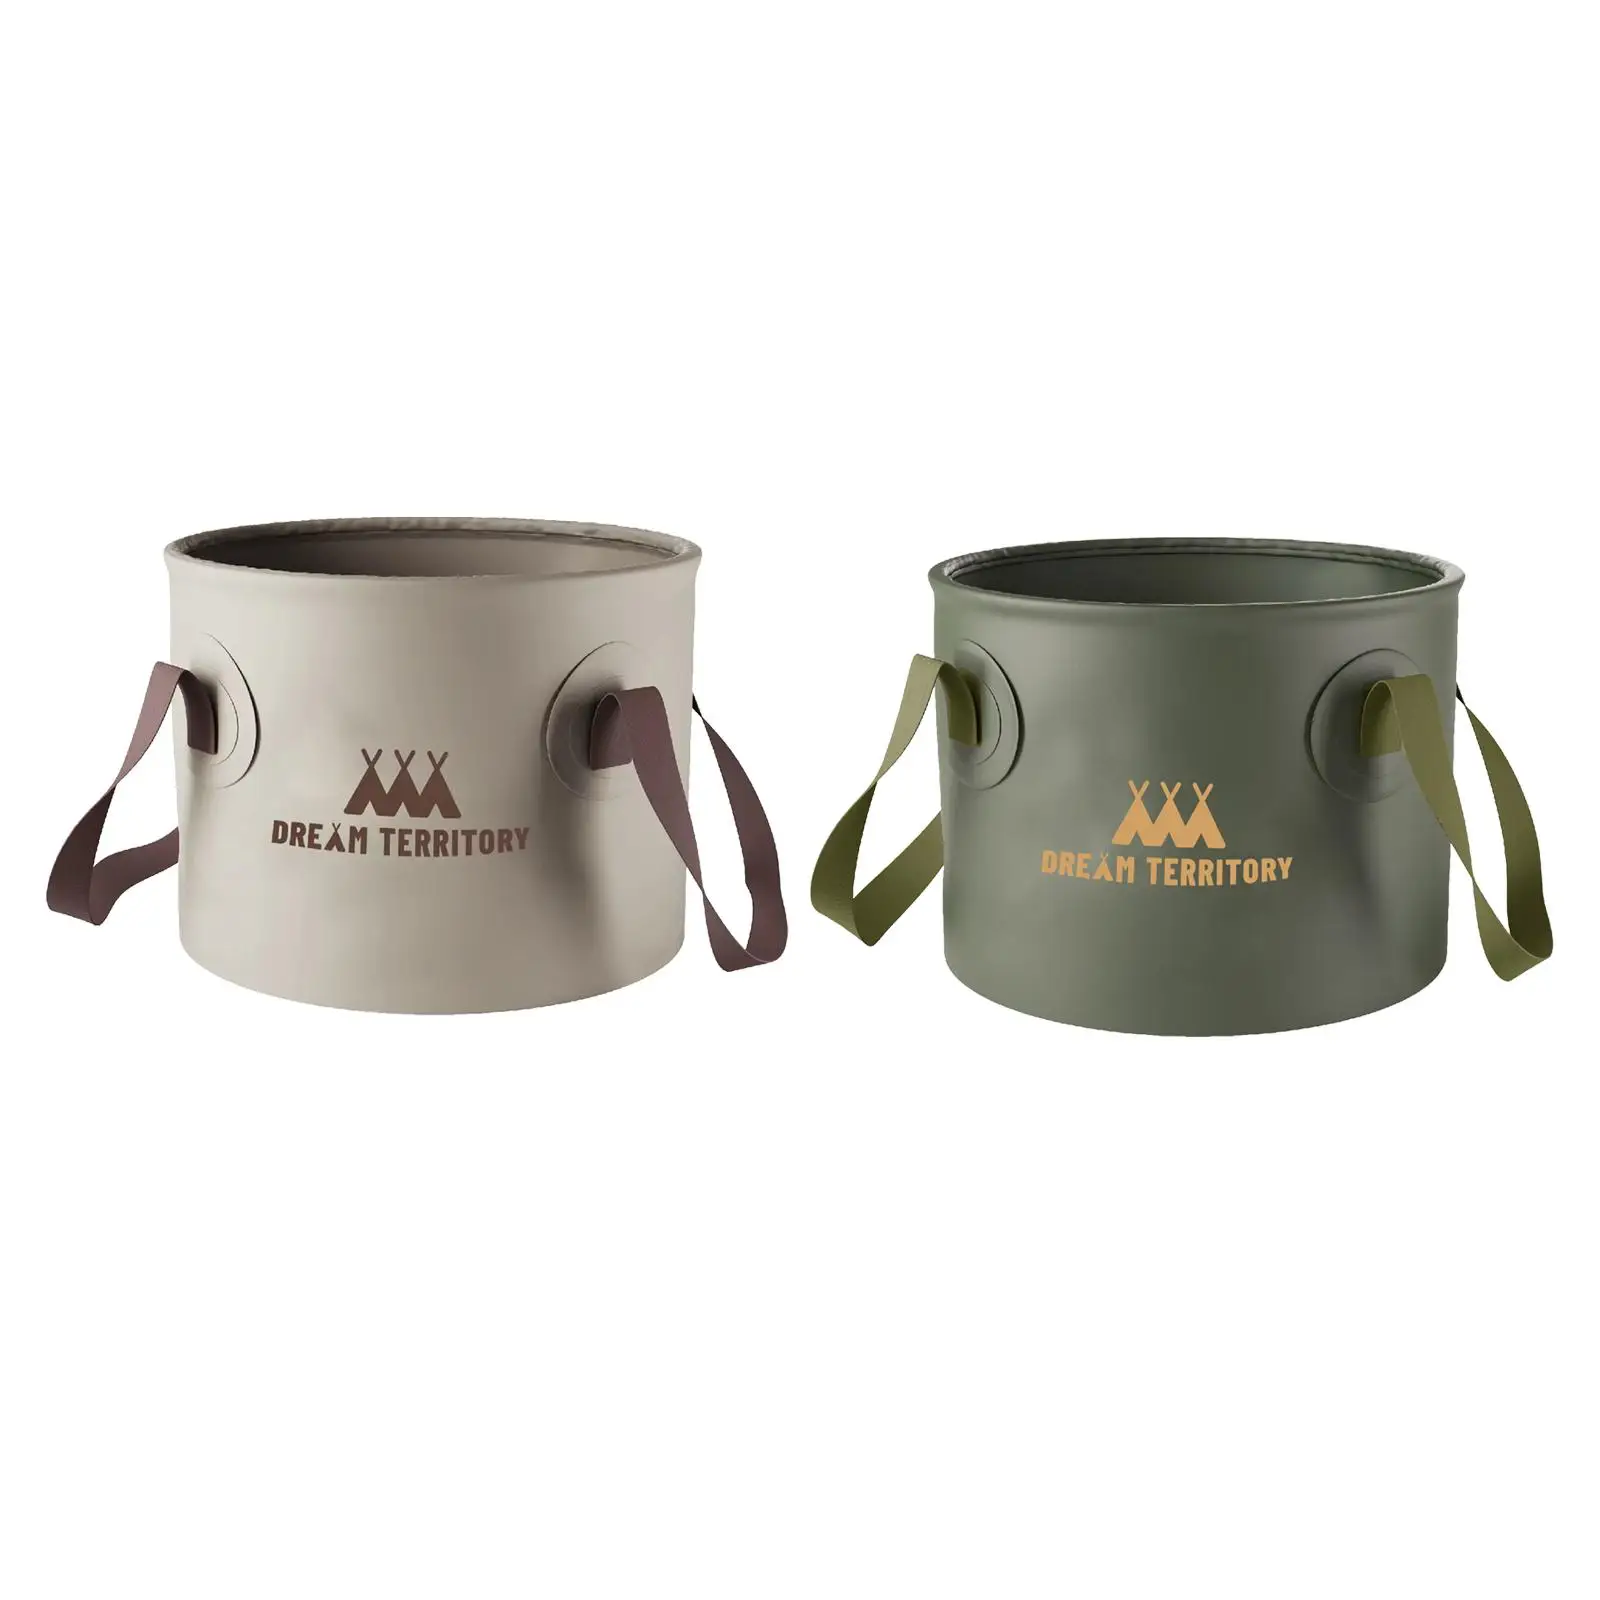 Collapsible Bucket Folding Water Bucket Portable Fishing Bucket Water Bag with Handle Basin Pail for Camping Car Washing Hiking